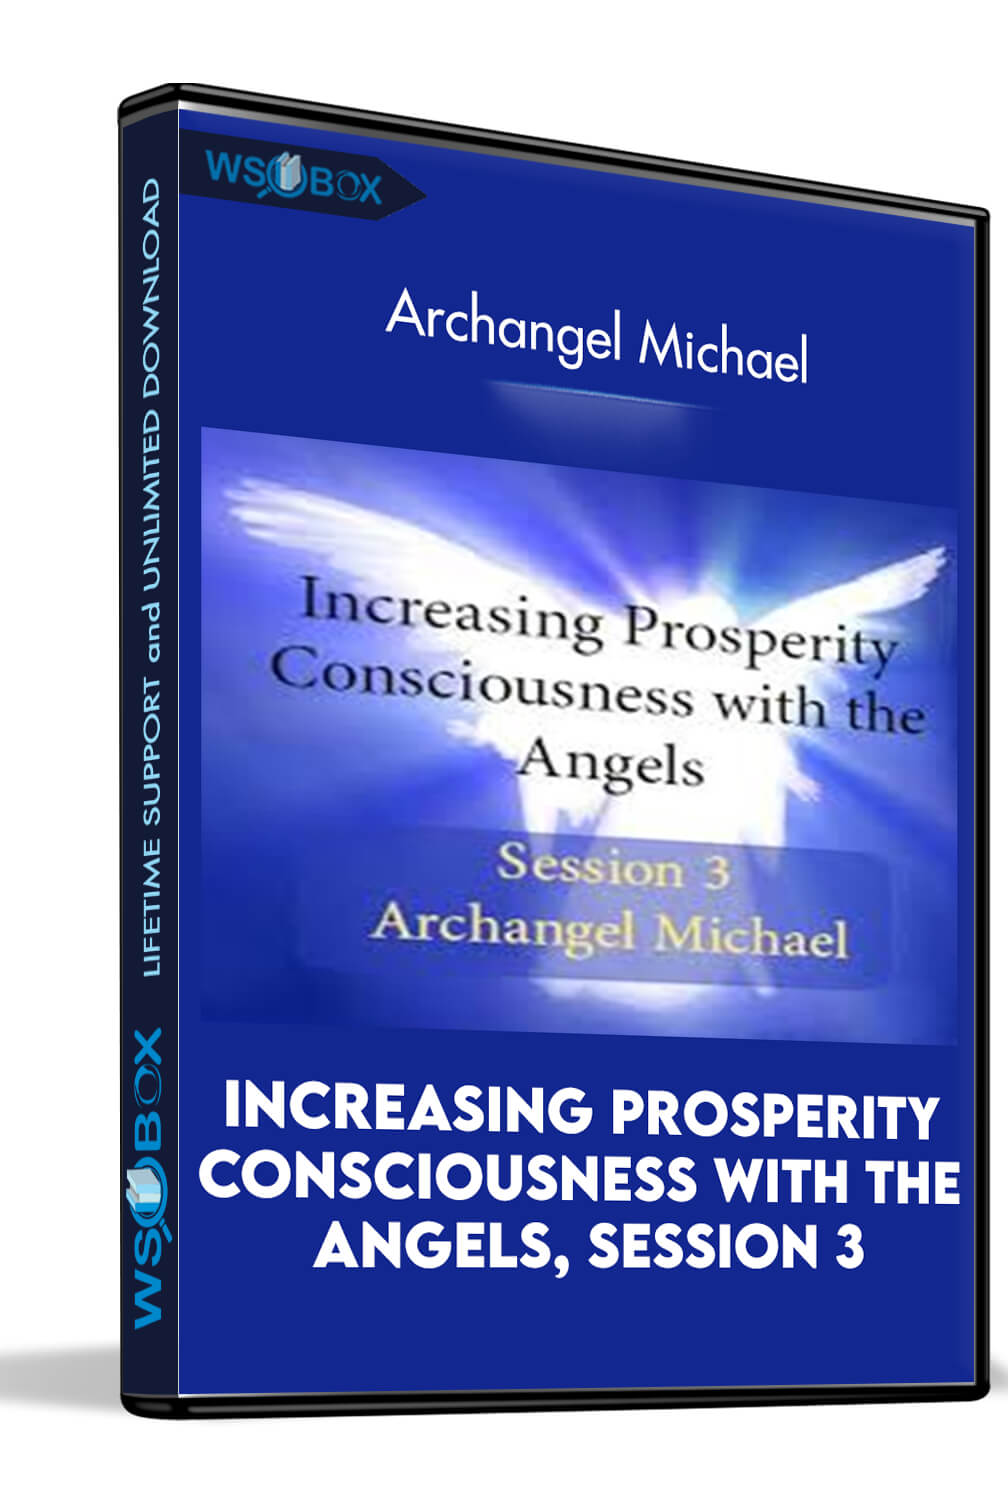 Increasing Prosperity Consciousness with the Angels, Session 3: Archangel Michael